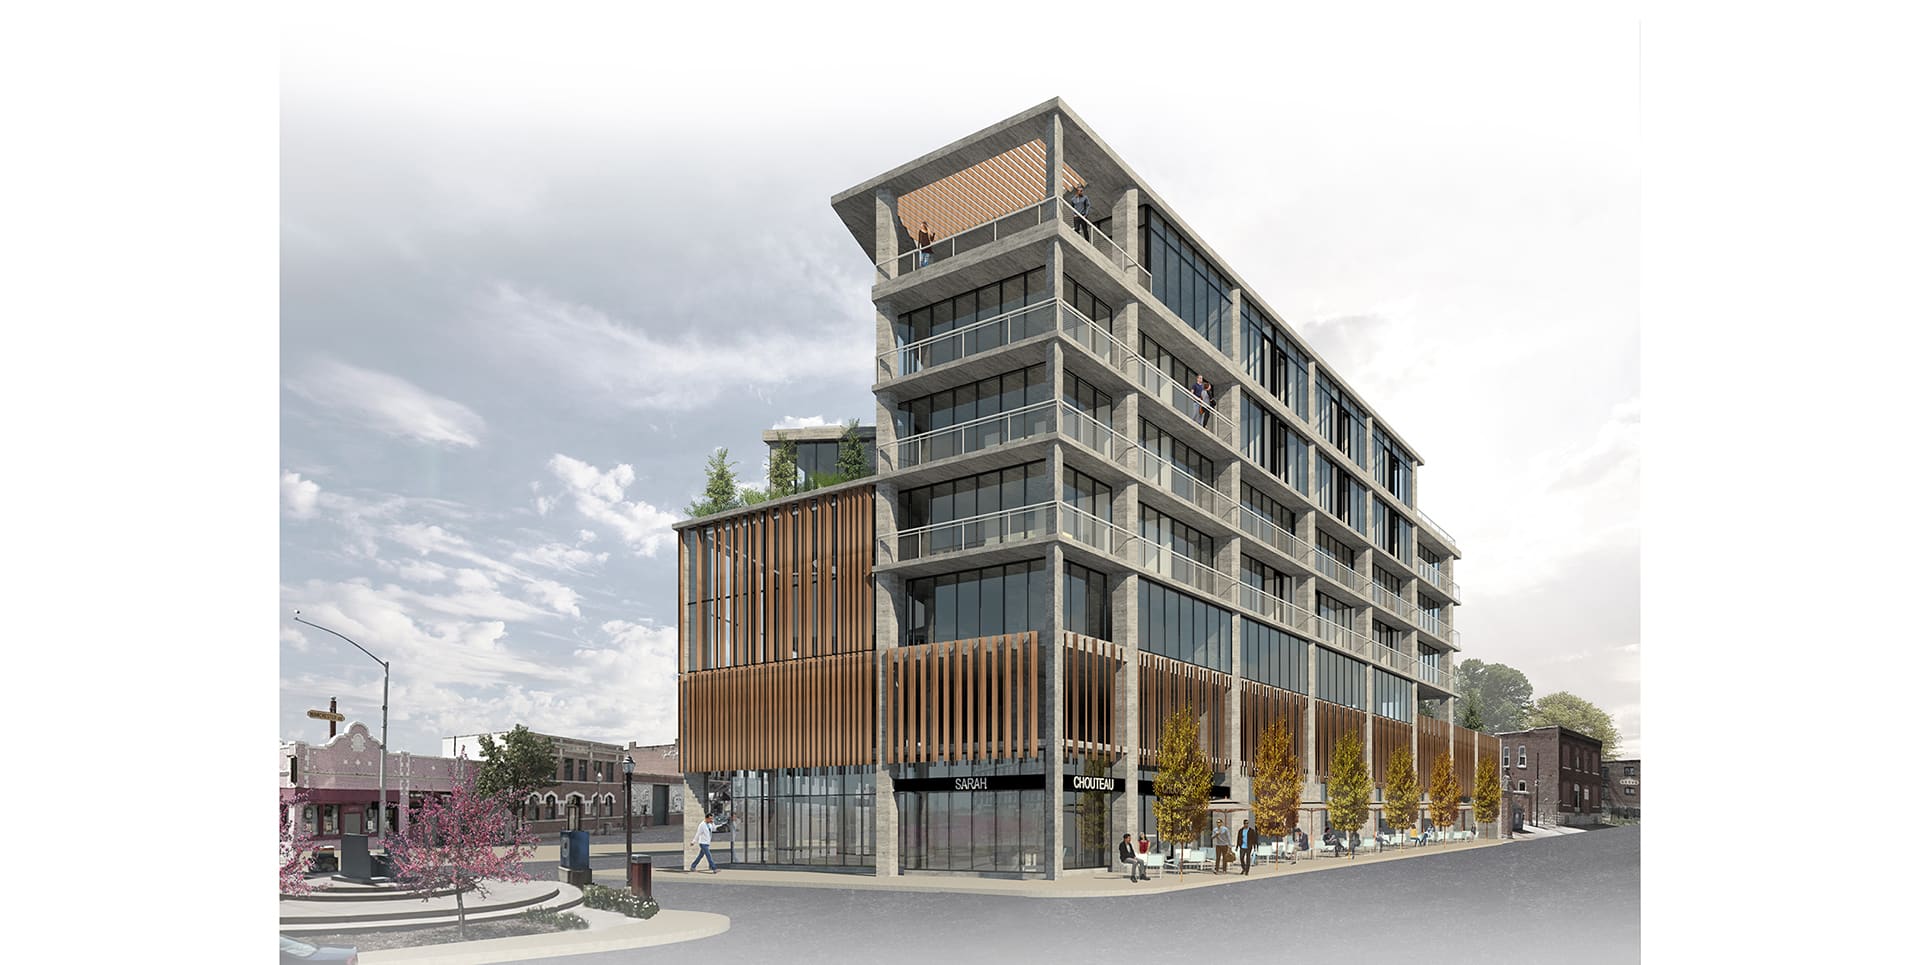 rendering of the grove mixed use building designed by trivers architectural firm in st. louis